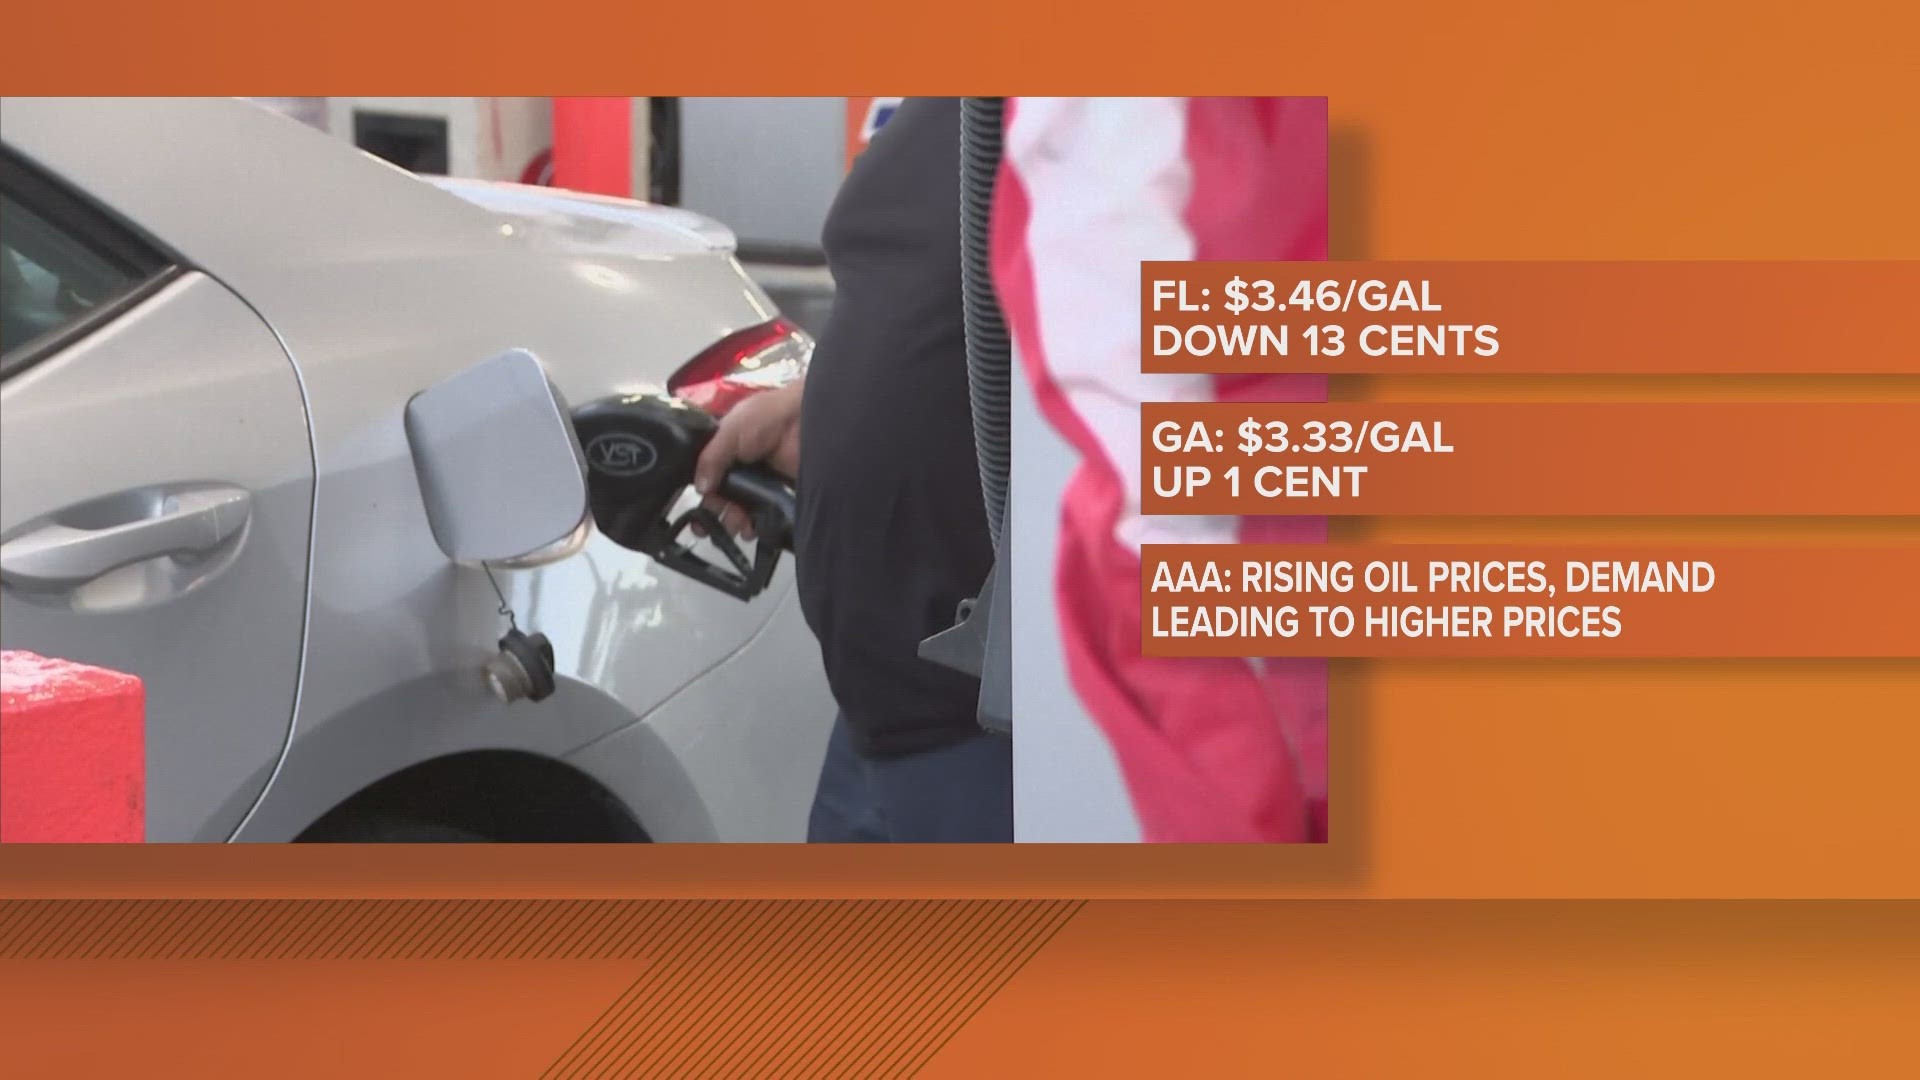 Drivers in Georgia are paying 1 cent more per gallon of gas compared to last week, according to AAA.